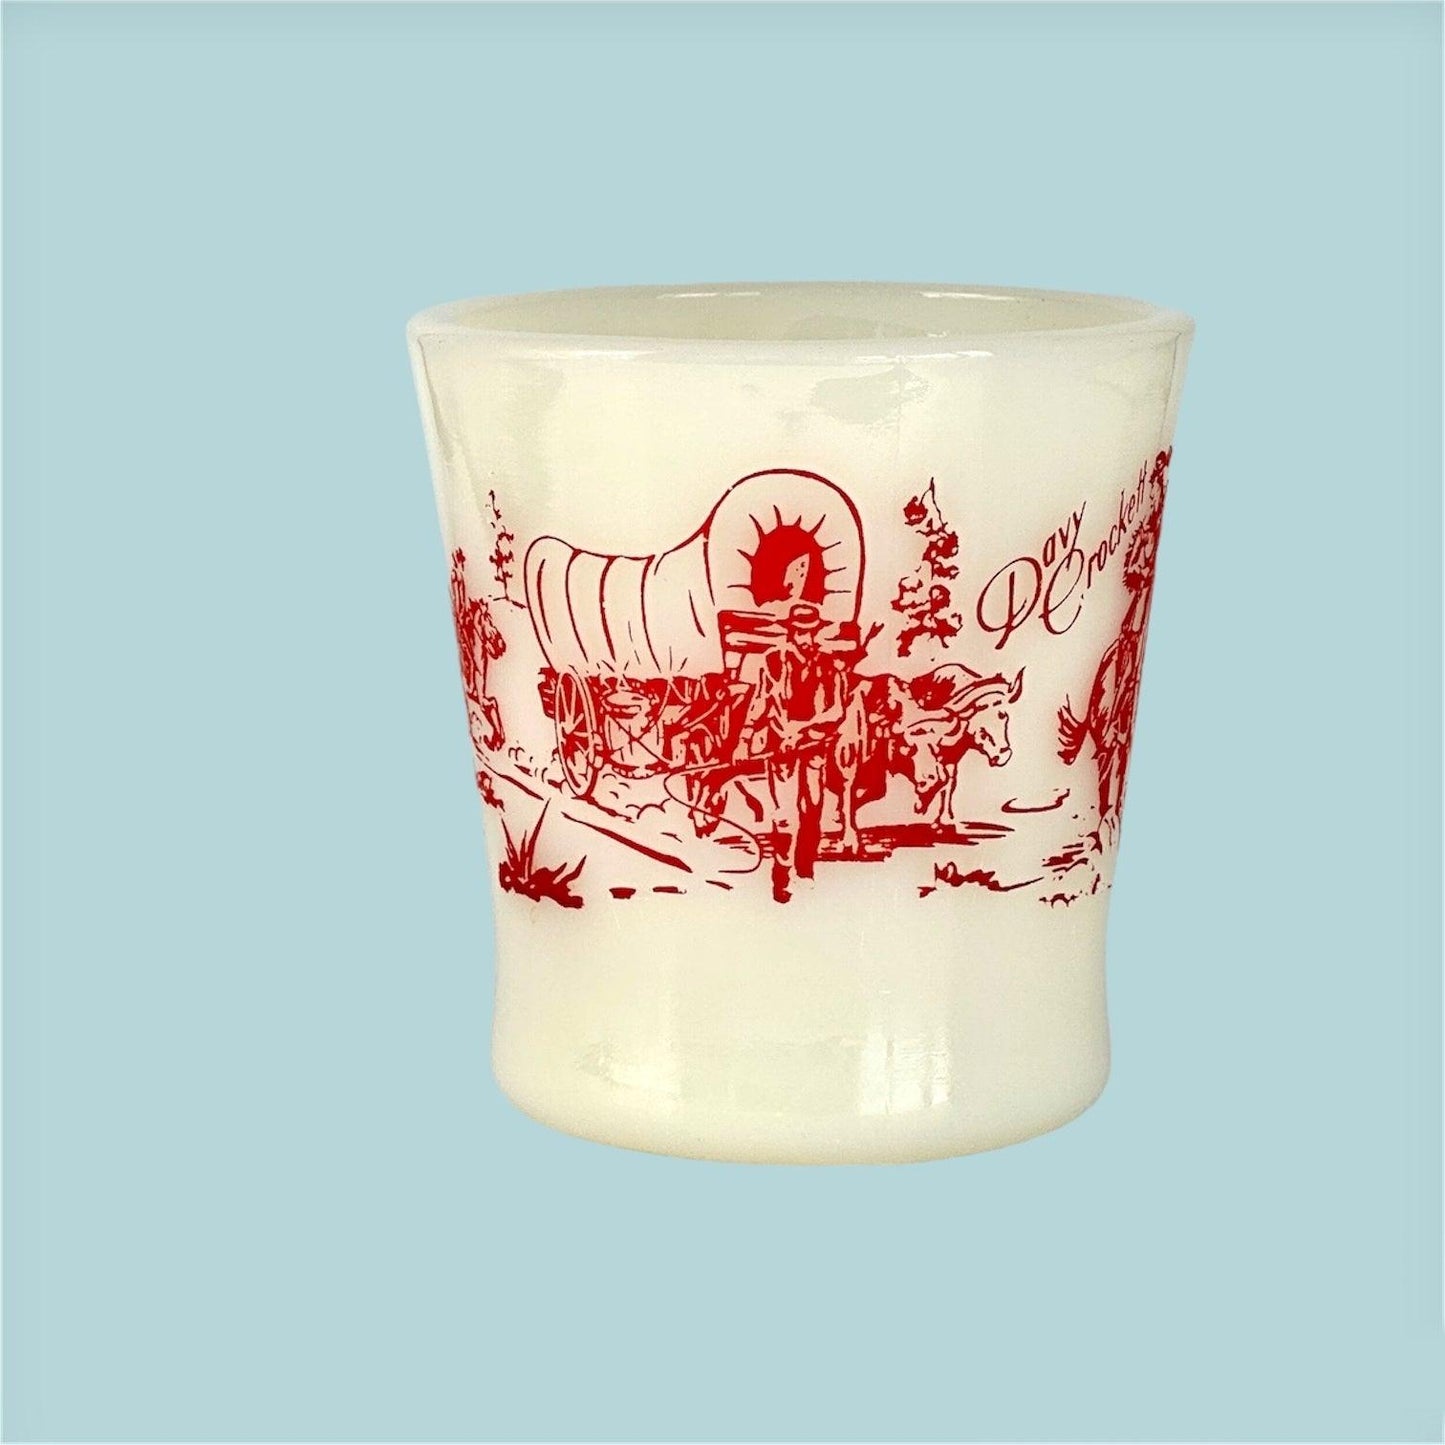 Fire King Oven Ware Davy Crockett Mug, 8 oz., Red | Vintage Glassware Collectibles